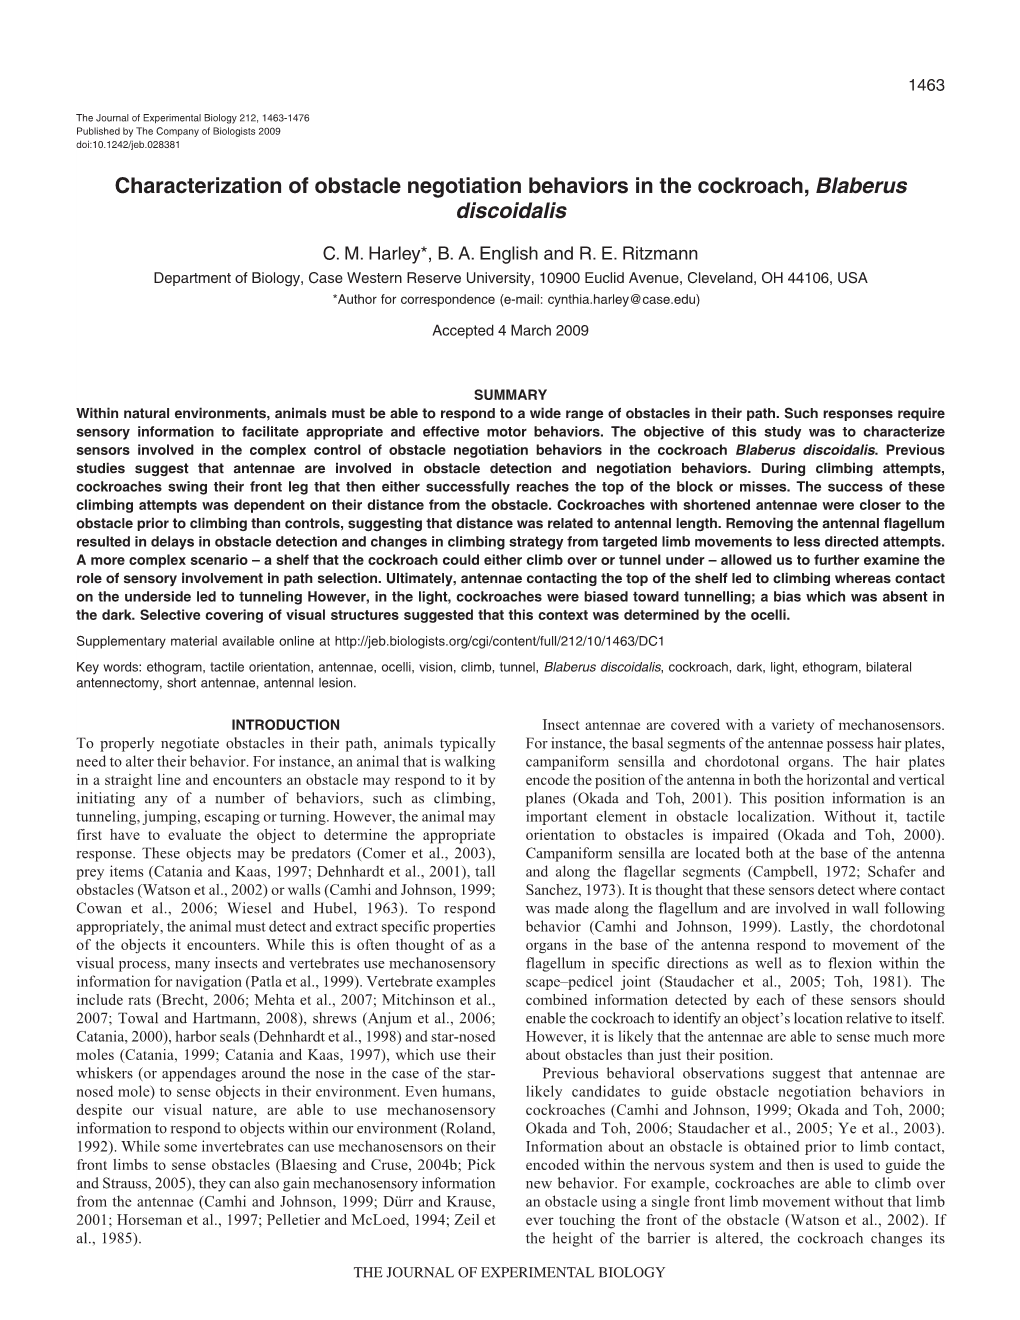 Characterization of Obstacle Negotiation Behaviors in the Cockroach, Blaberus Discoidalis